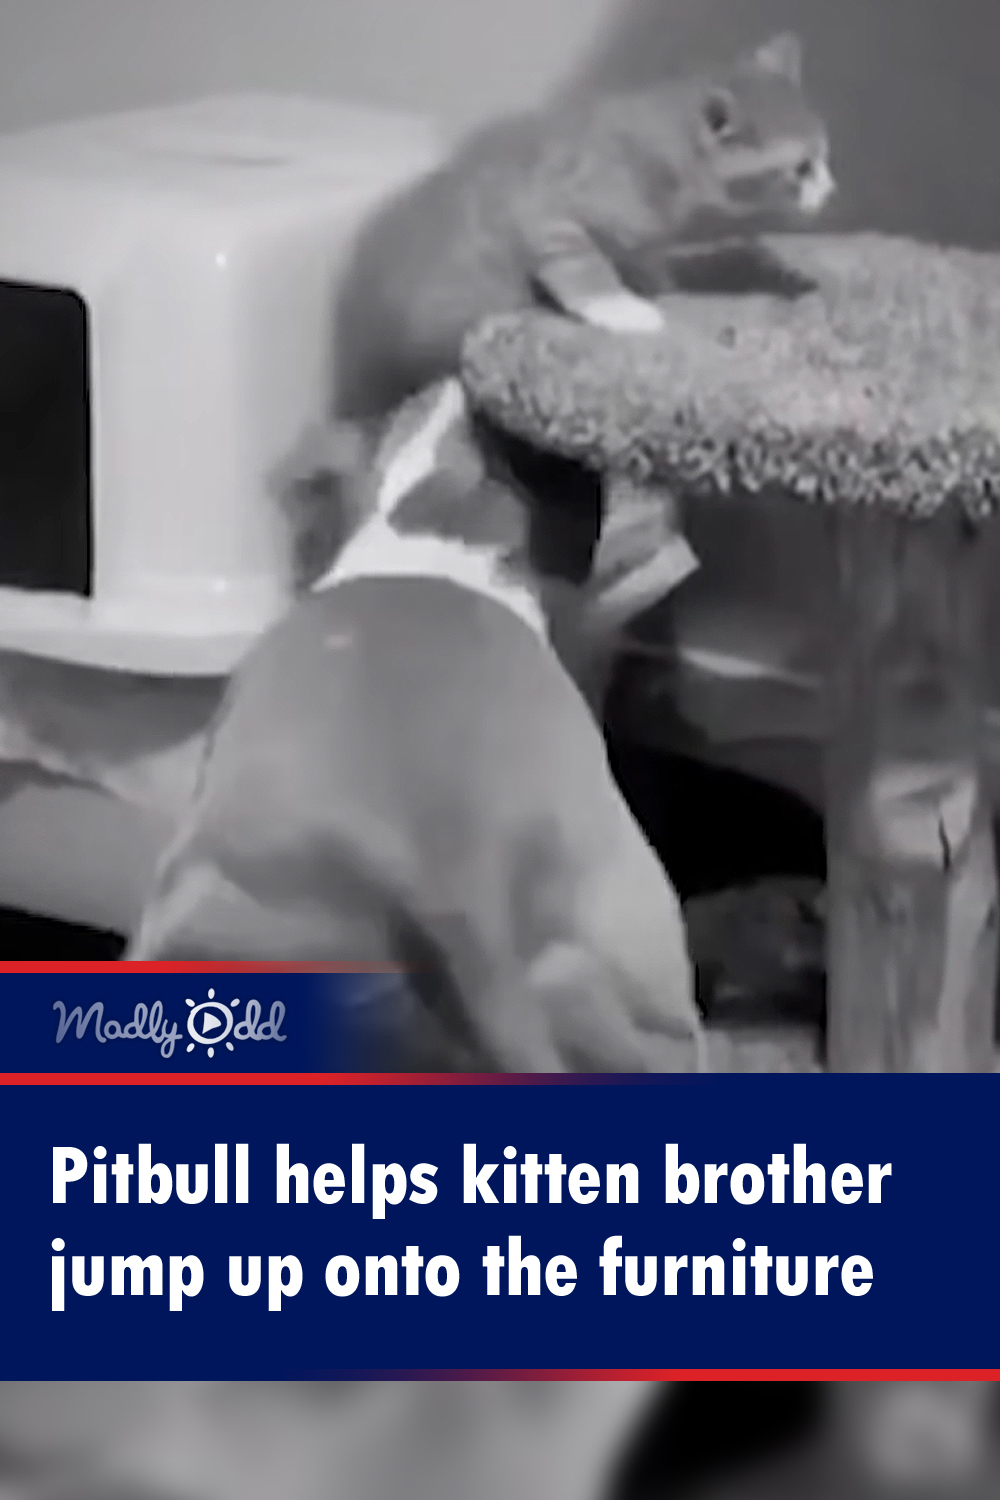 Pitbull helps kitten brother jump up onto the furniture